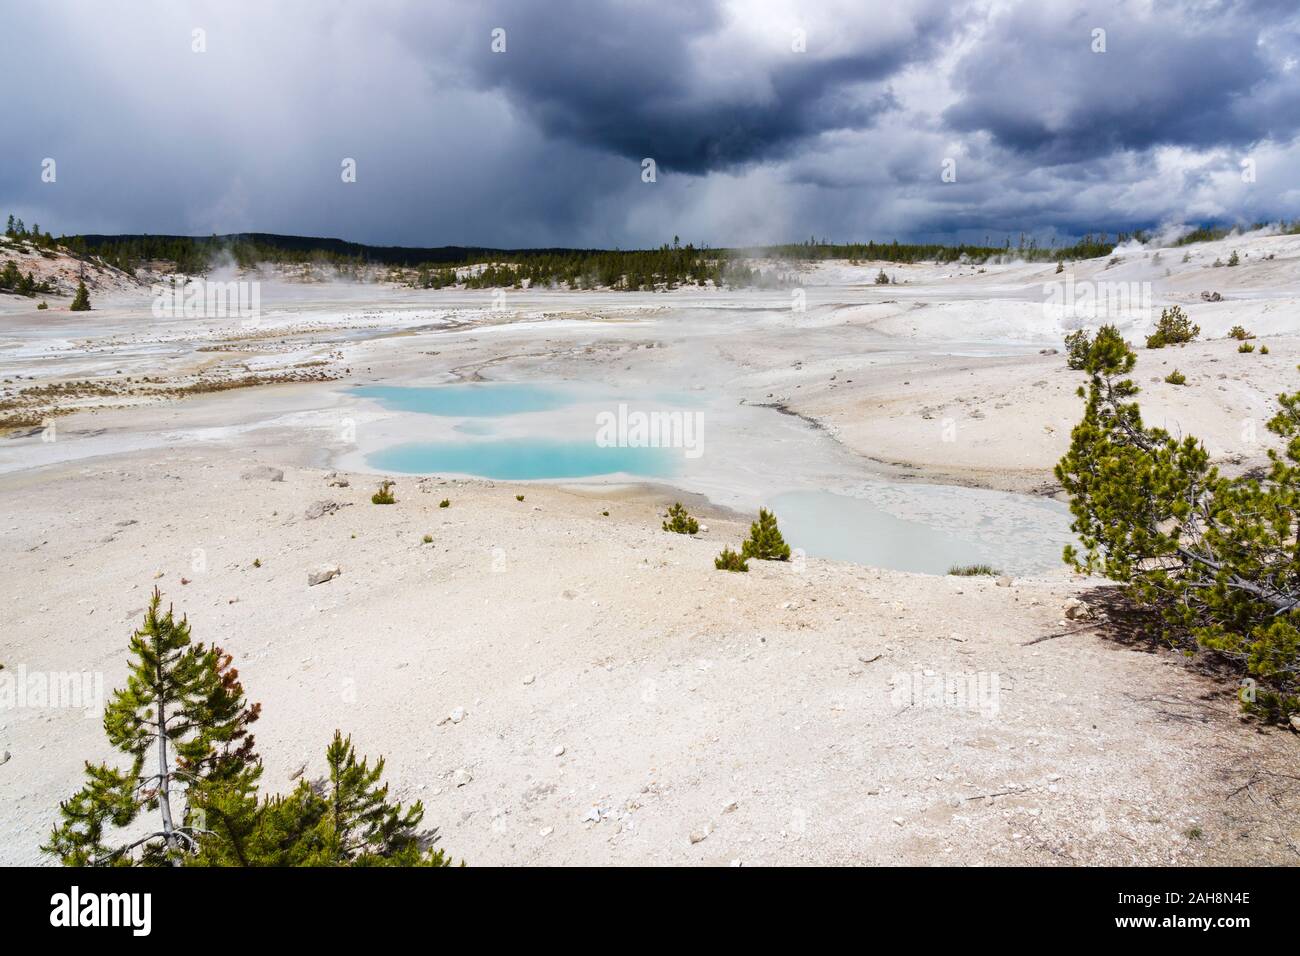 Norris Geyser Basin, Parc National de Yellowstone, Wyoming, United States Banque D'Images